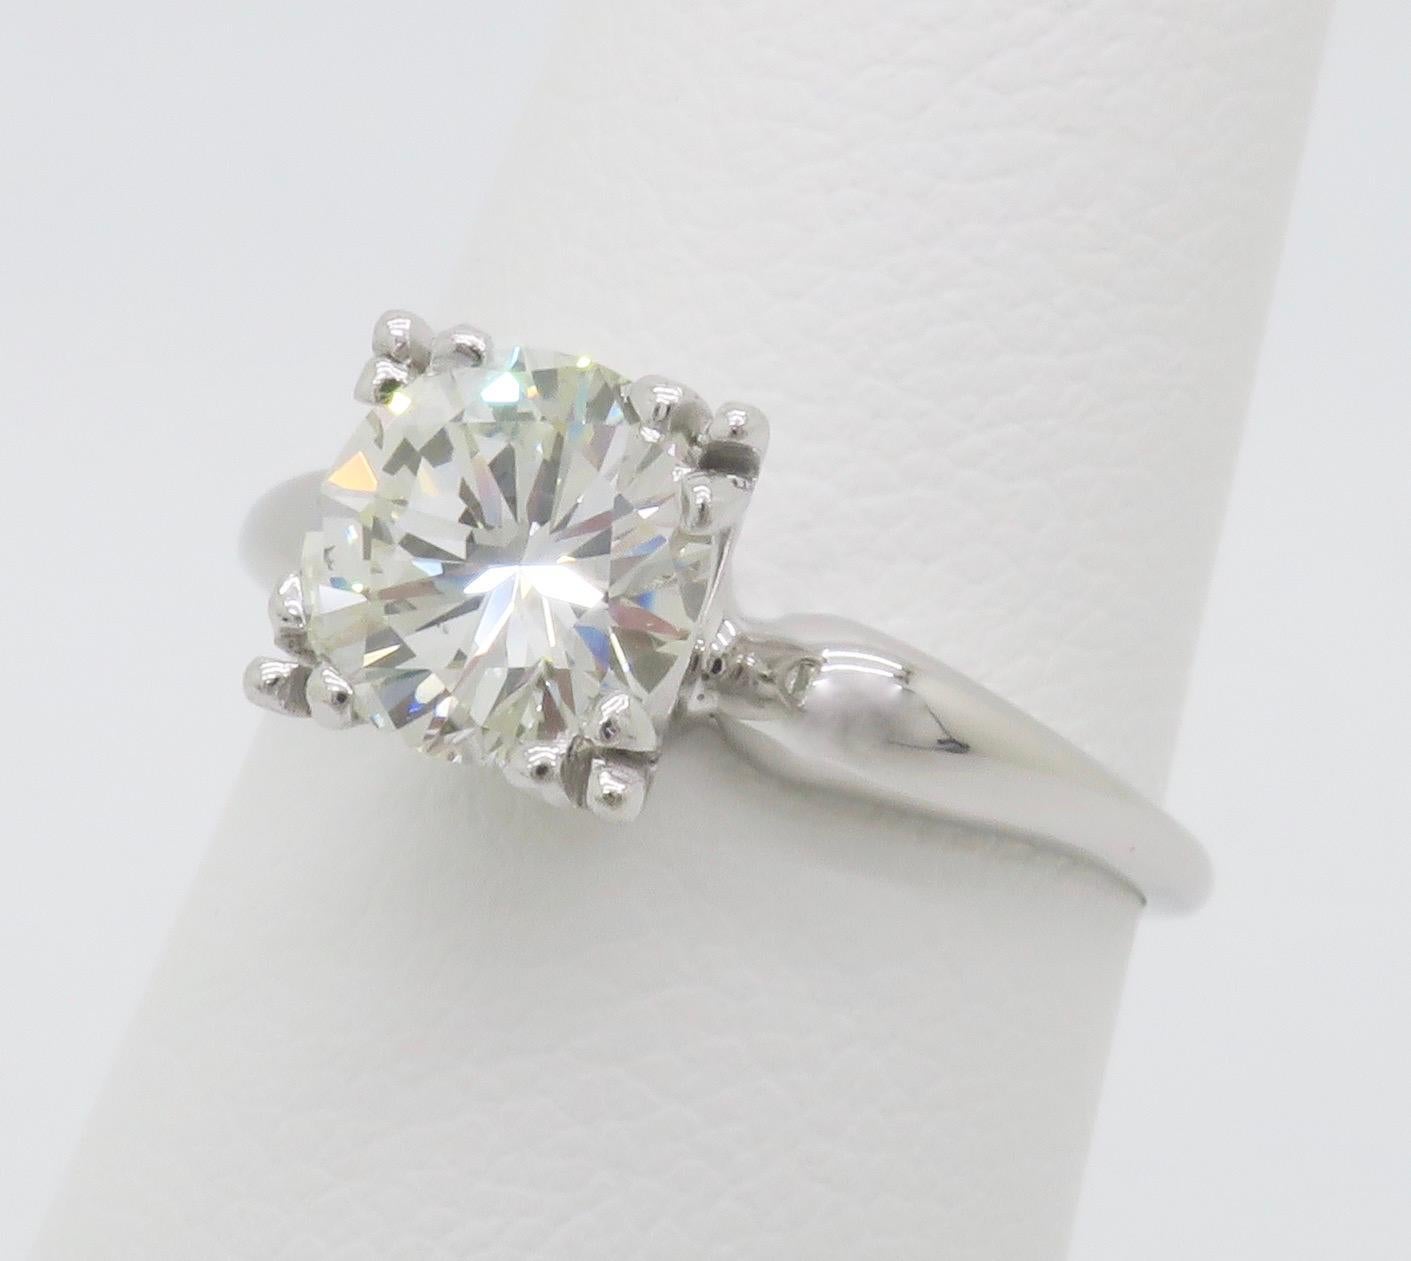 Vintage 1.45CT Round Brilliant Cut Diamond Solitaire Ring  In Excellent Condition For Sale In Webster, NY